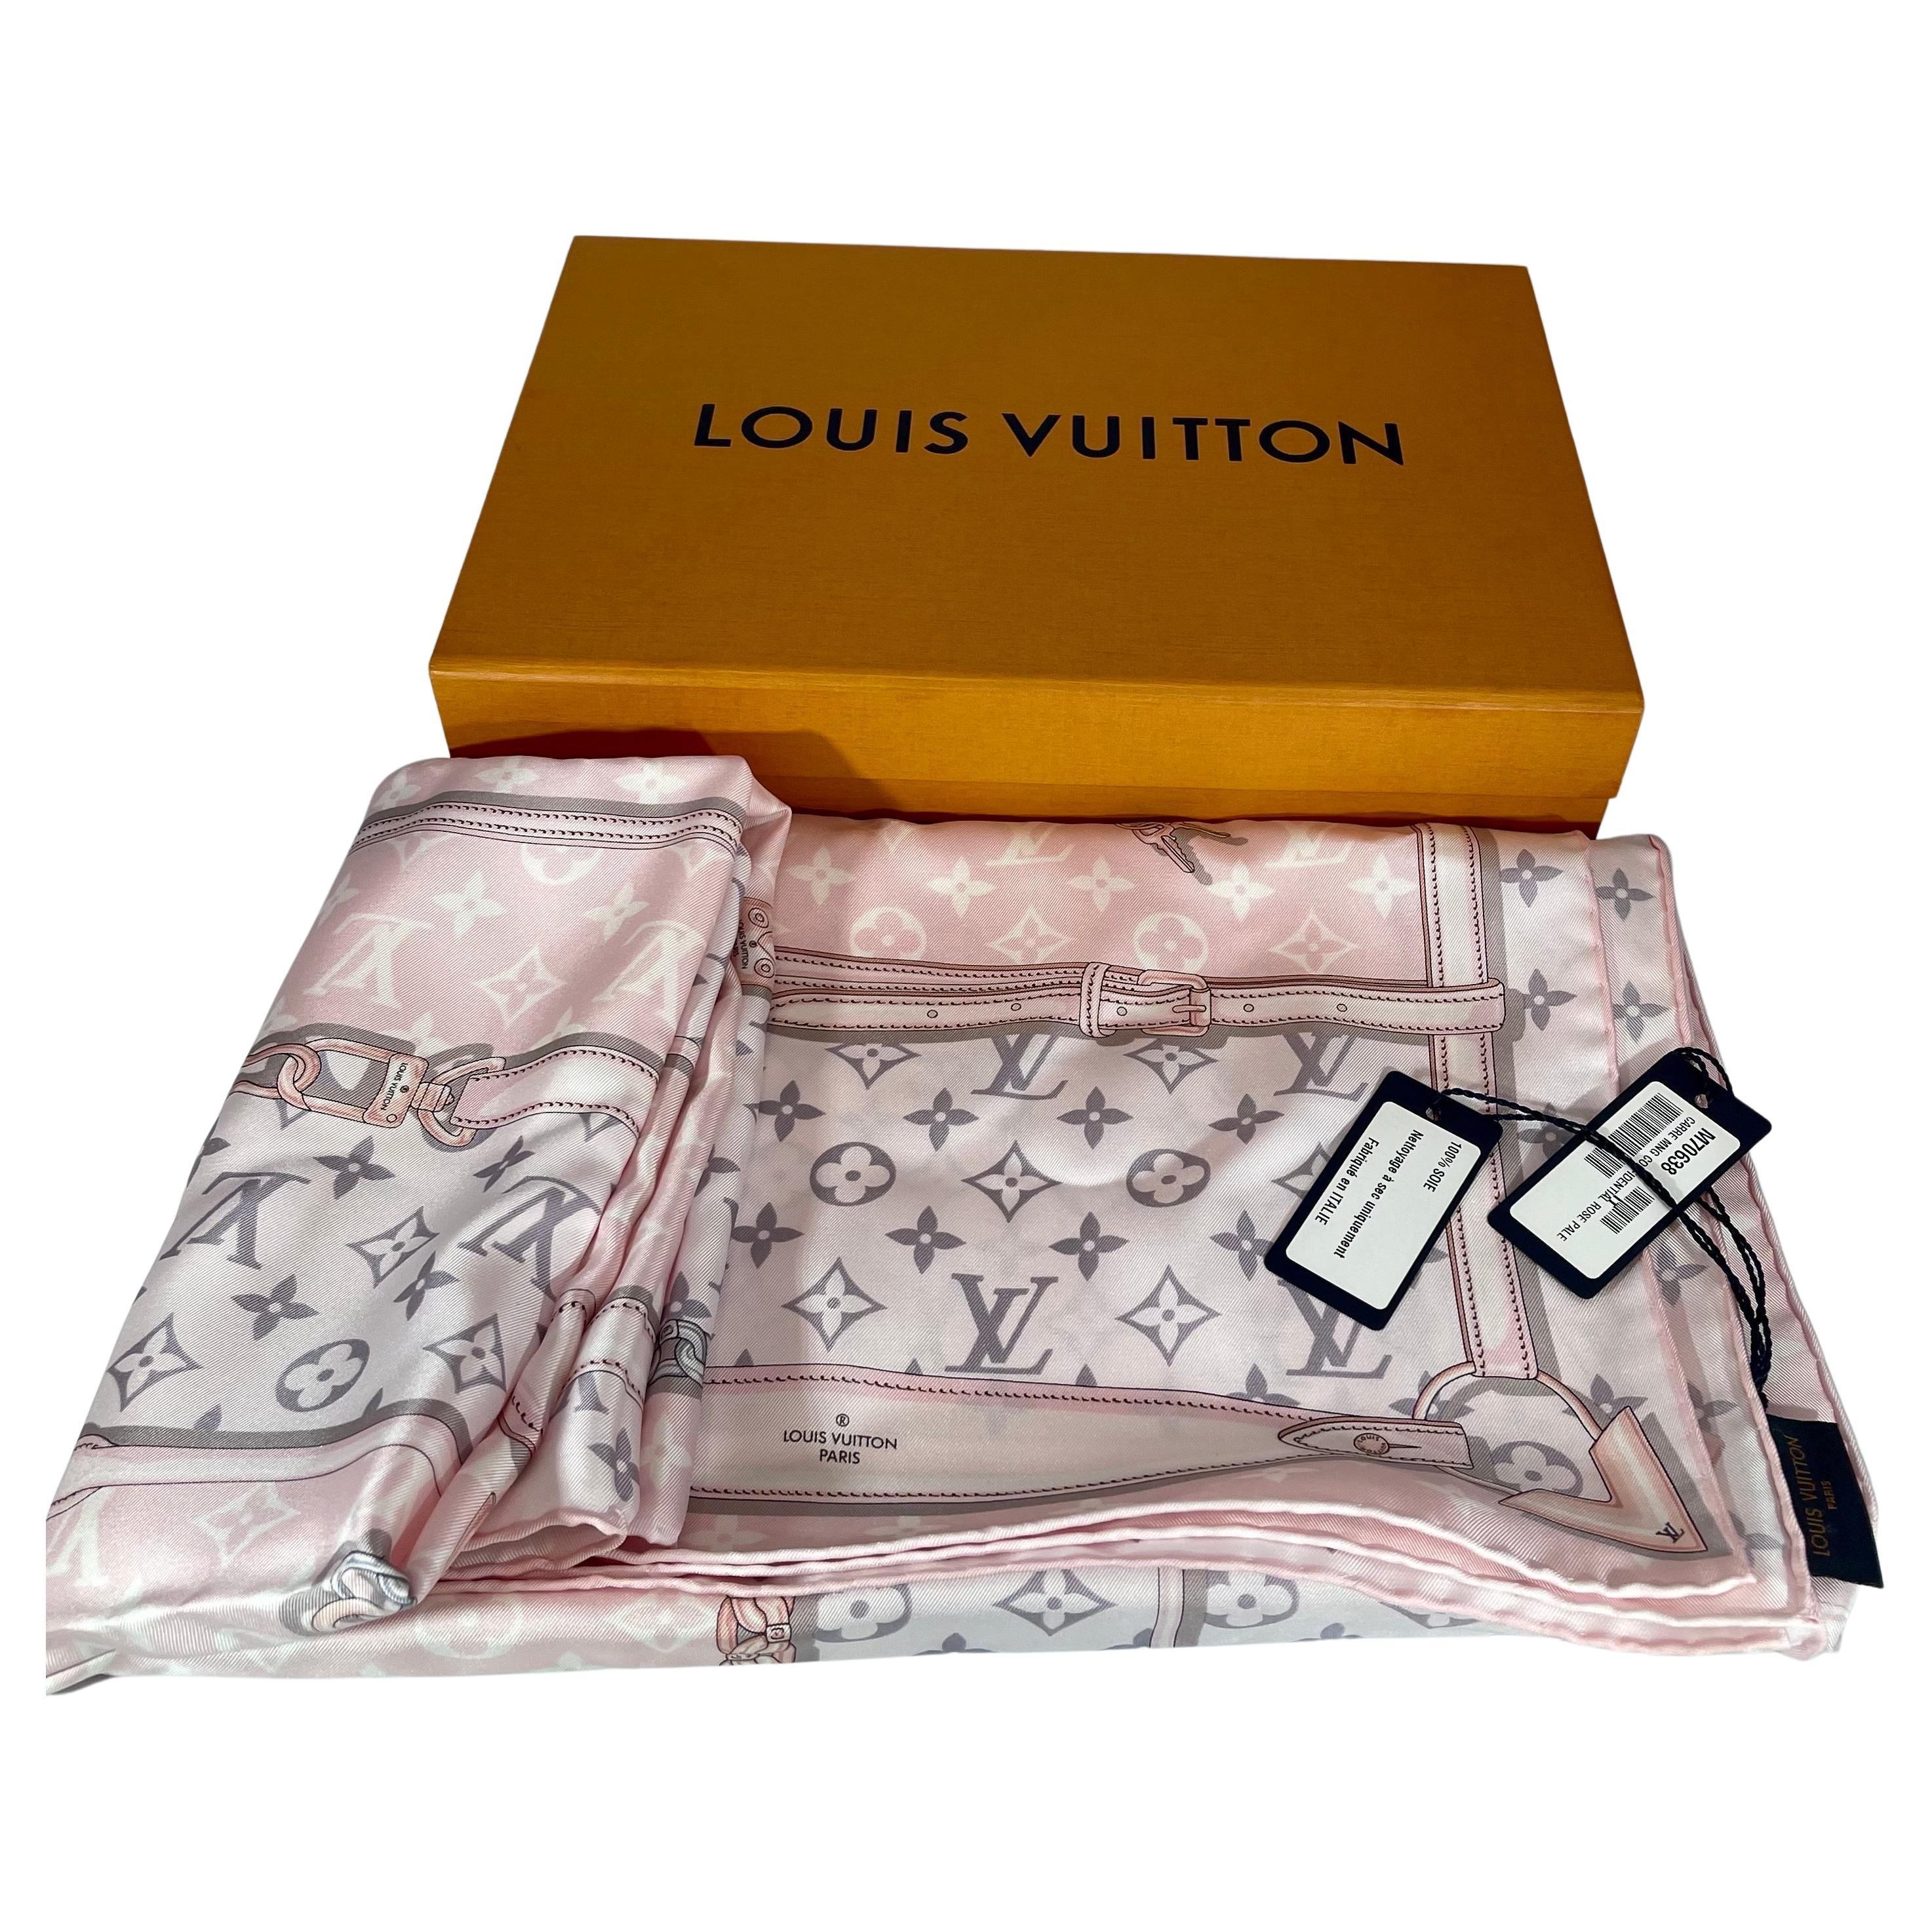 Vintage Louis Vuitton: Bags, Clothing & More - 12,951 For Sale at 